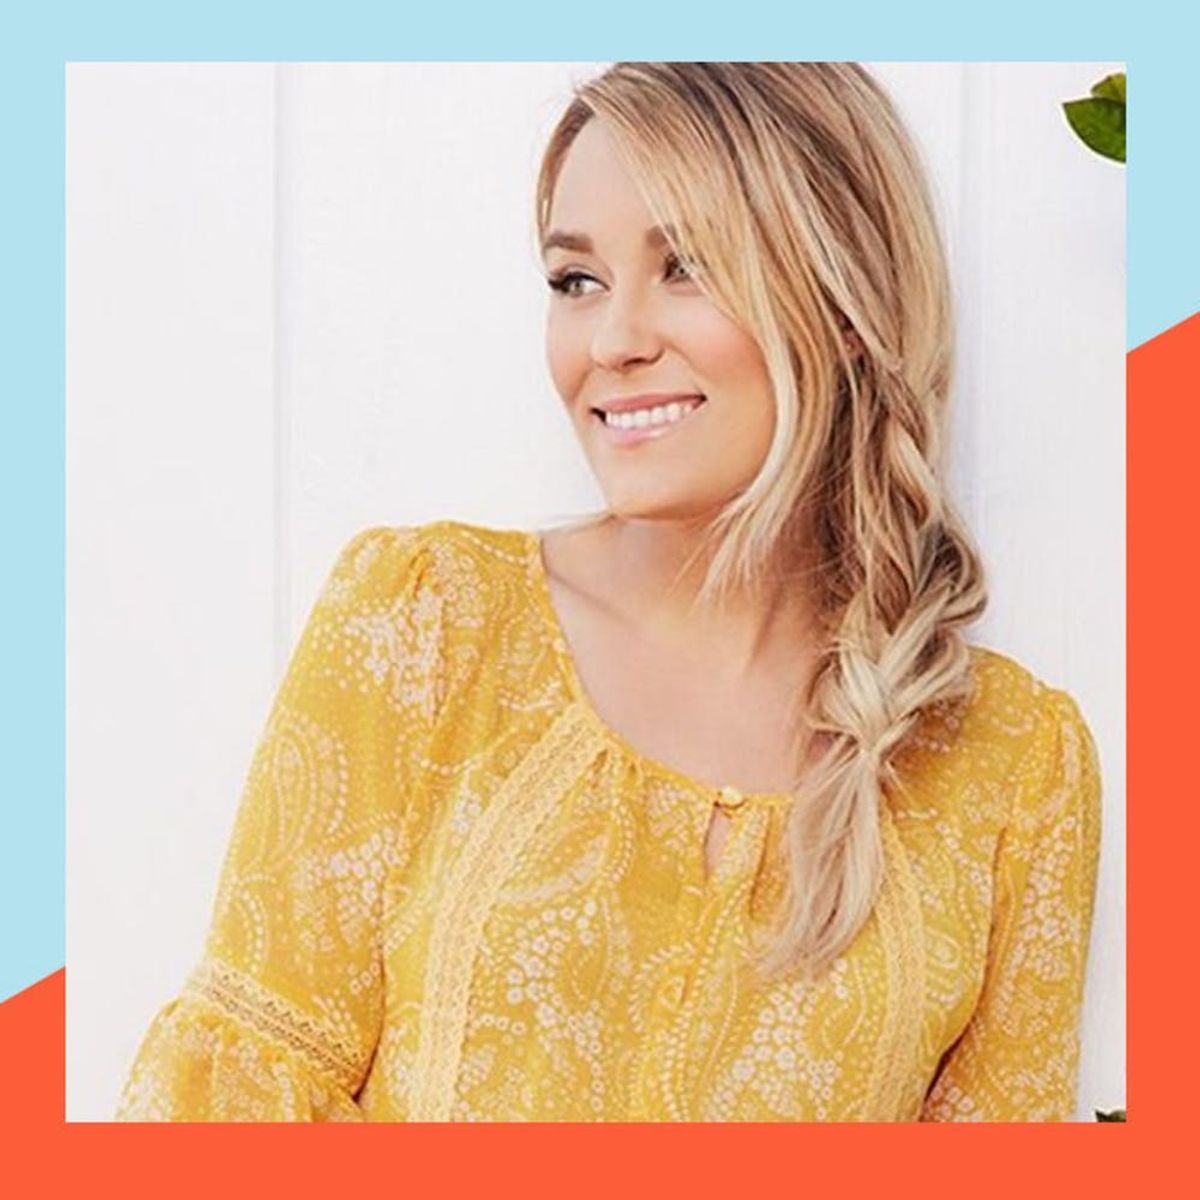 Lauren Conrad’s Festival Collection Is Anything But “Costumey”